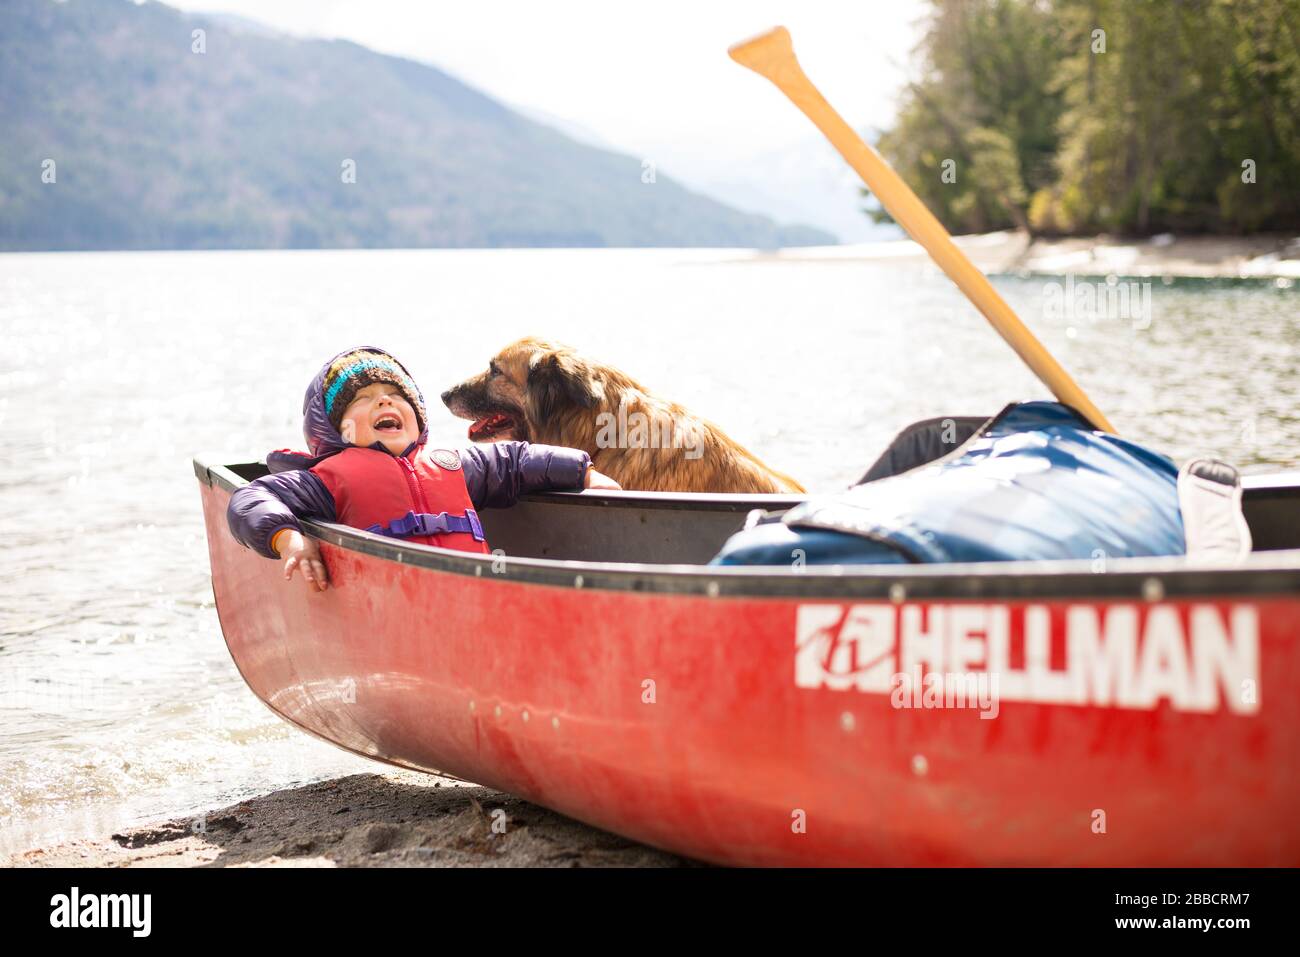 A boy and his dog messing around on Wragge beach, Slocan Lake, British Columbia Stock Photo